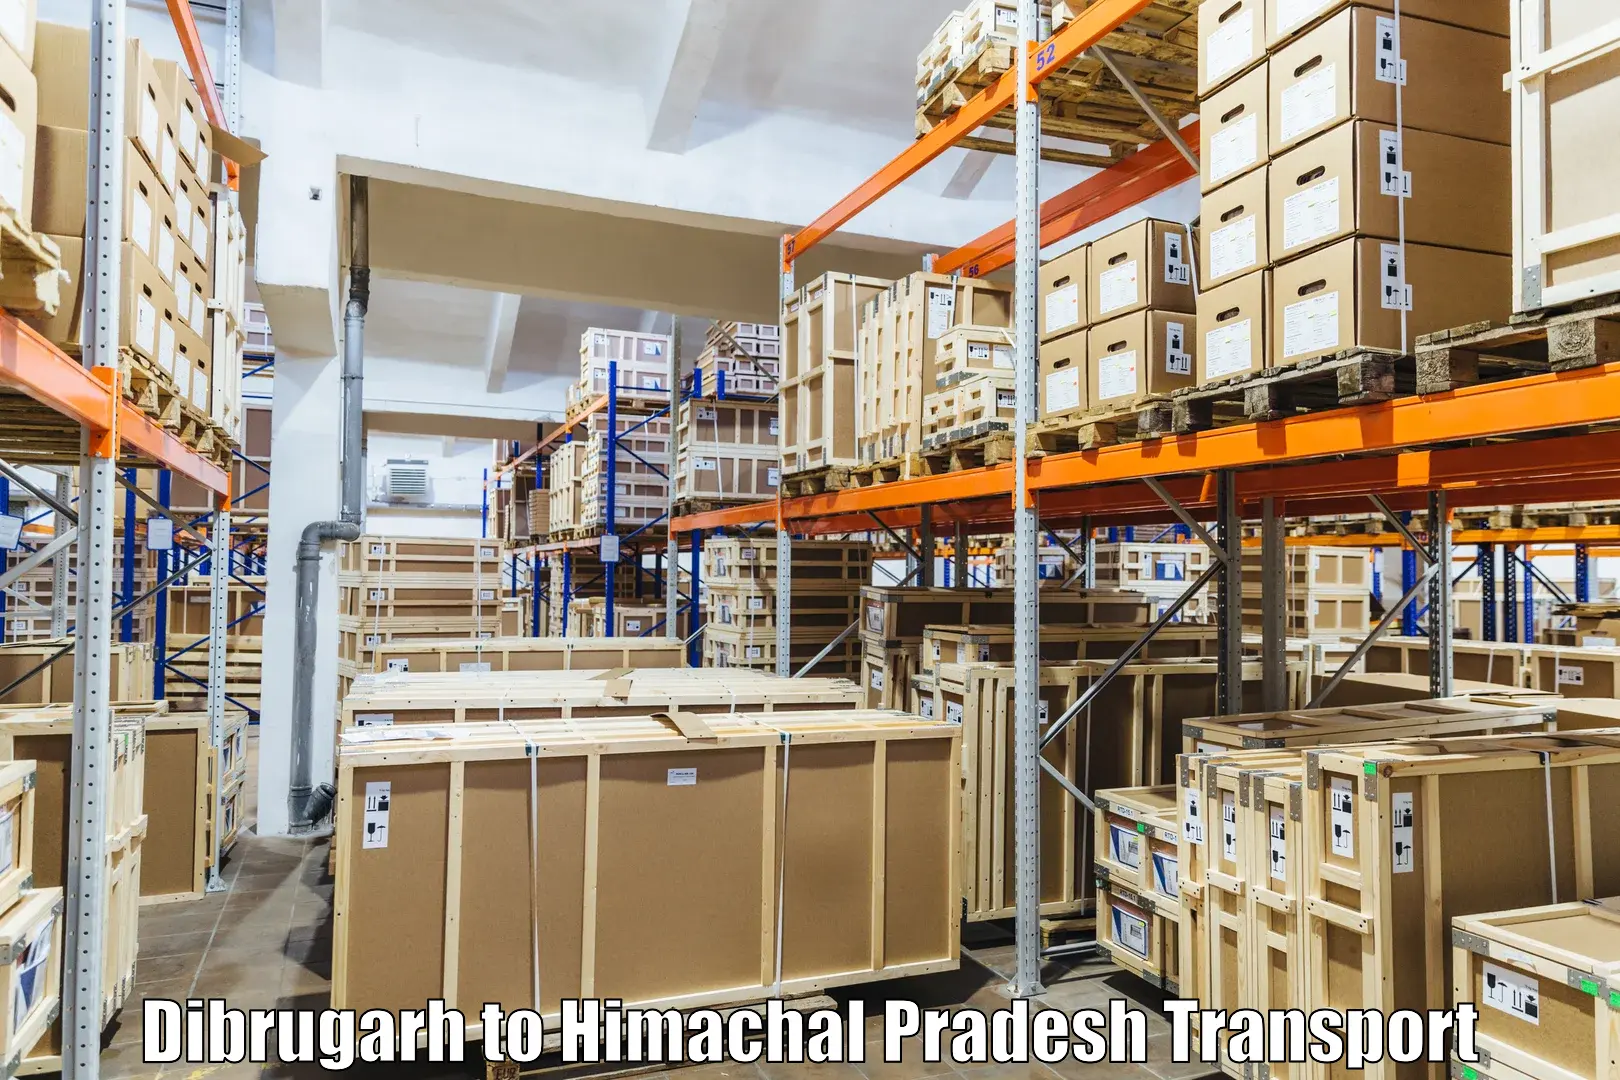 Transport shared services in Dibrugarh to Bangana